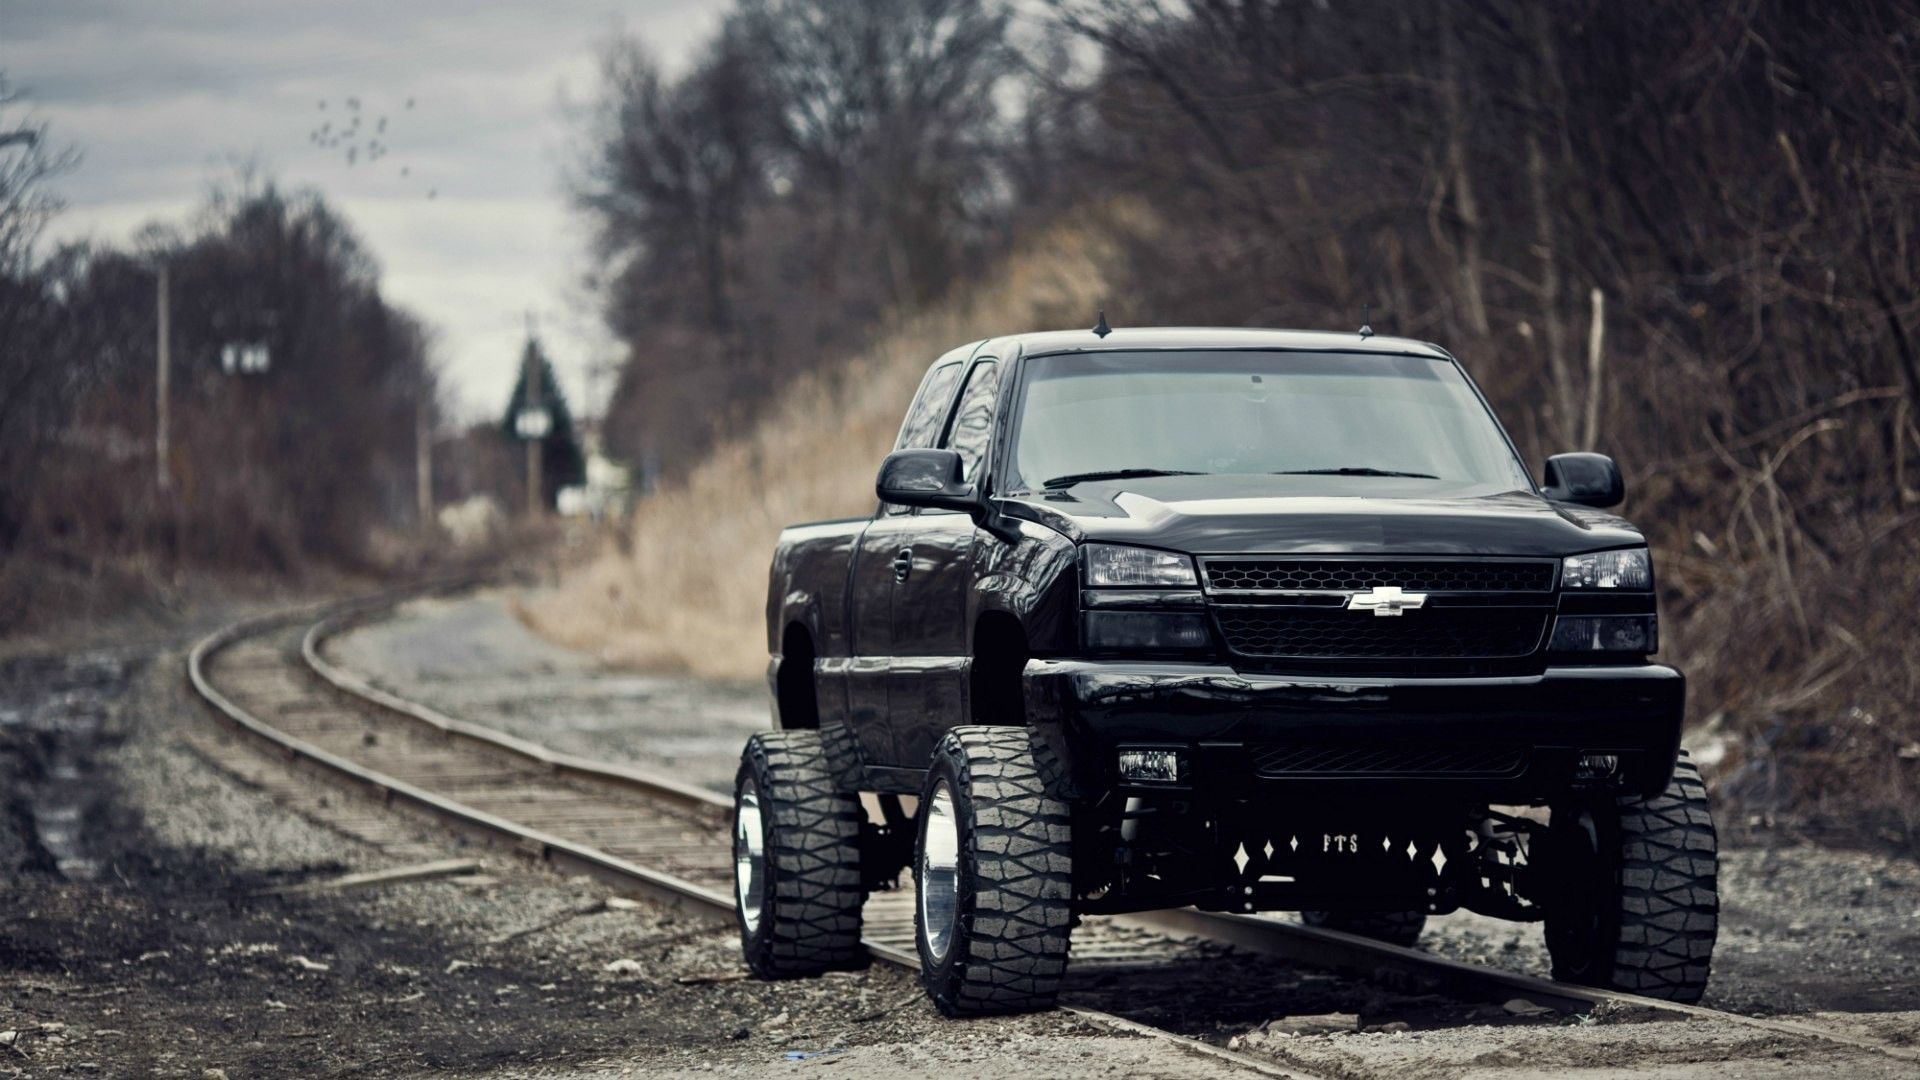 Beautiful Lifted Chevy Truck Wallpaper. Chevy trucks, Trucks, Lifted chevy